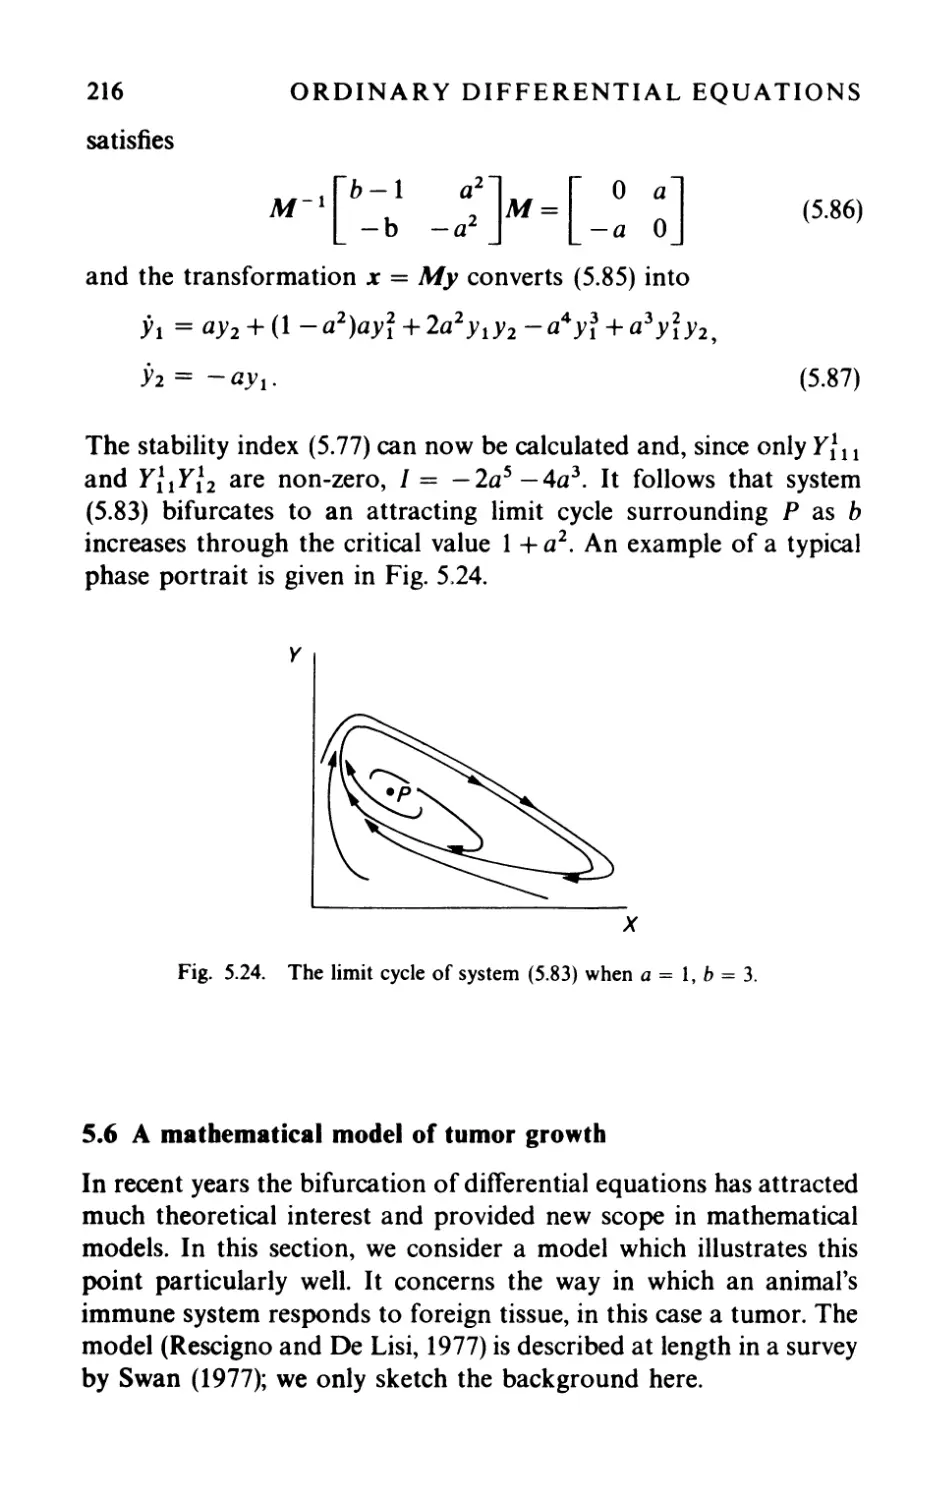 5.6 A mathematical mode] of tumor growth